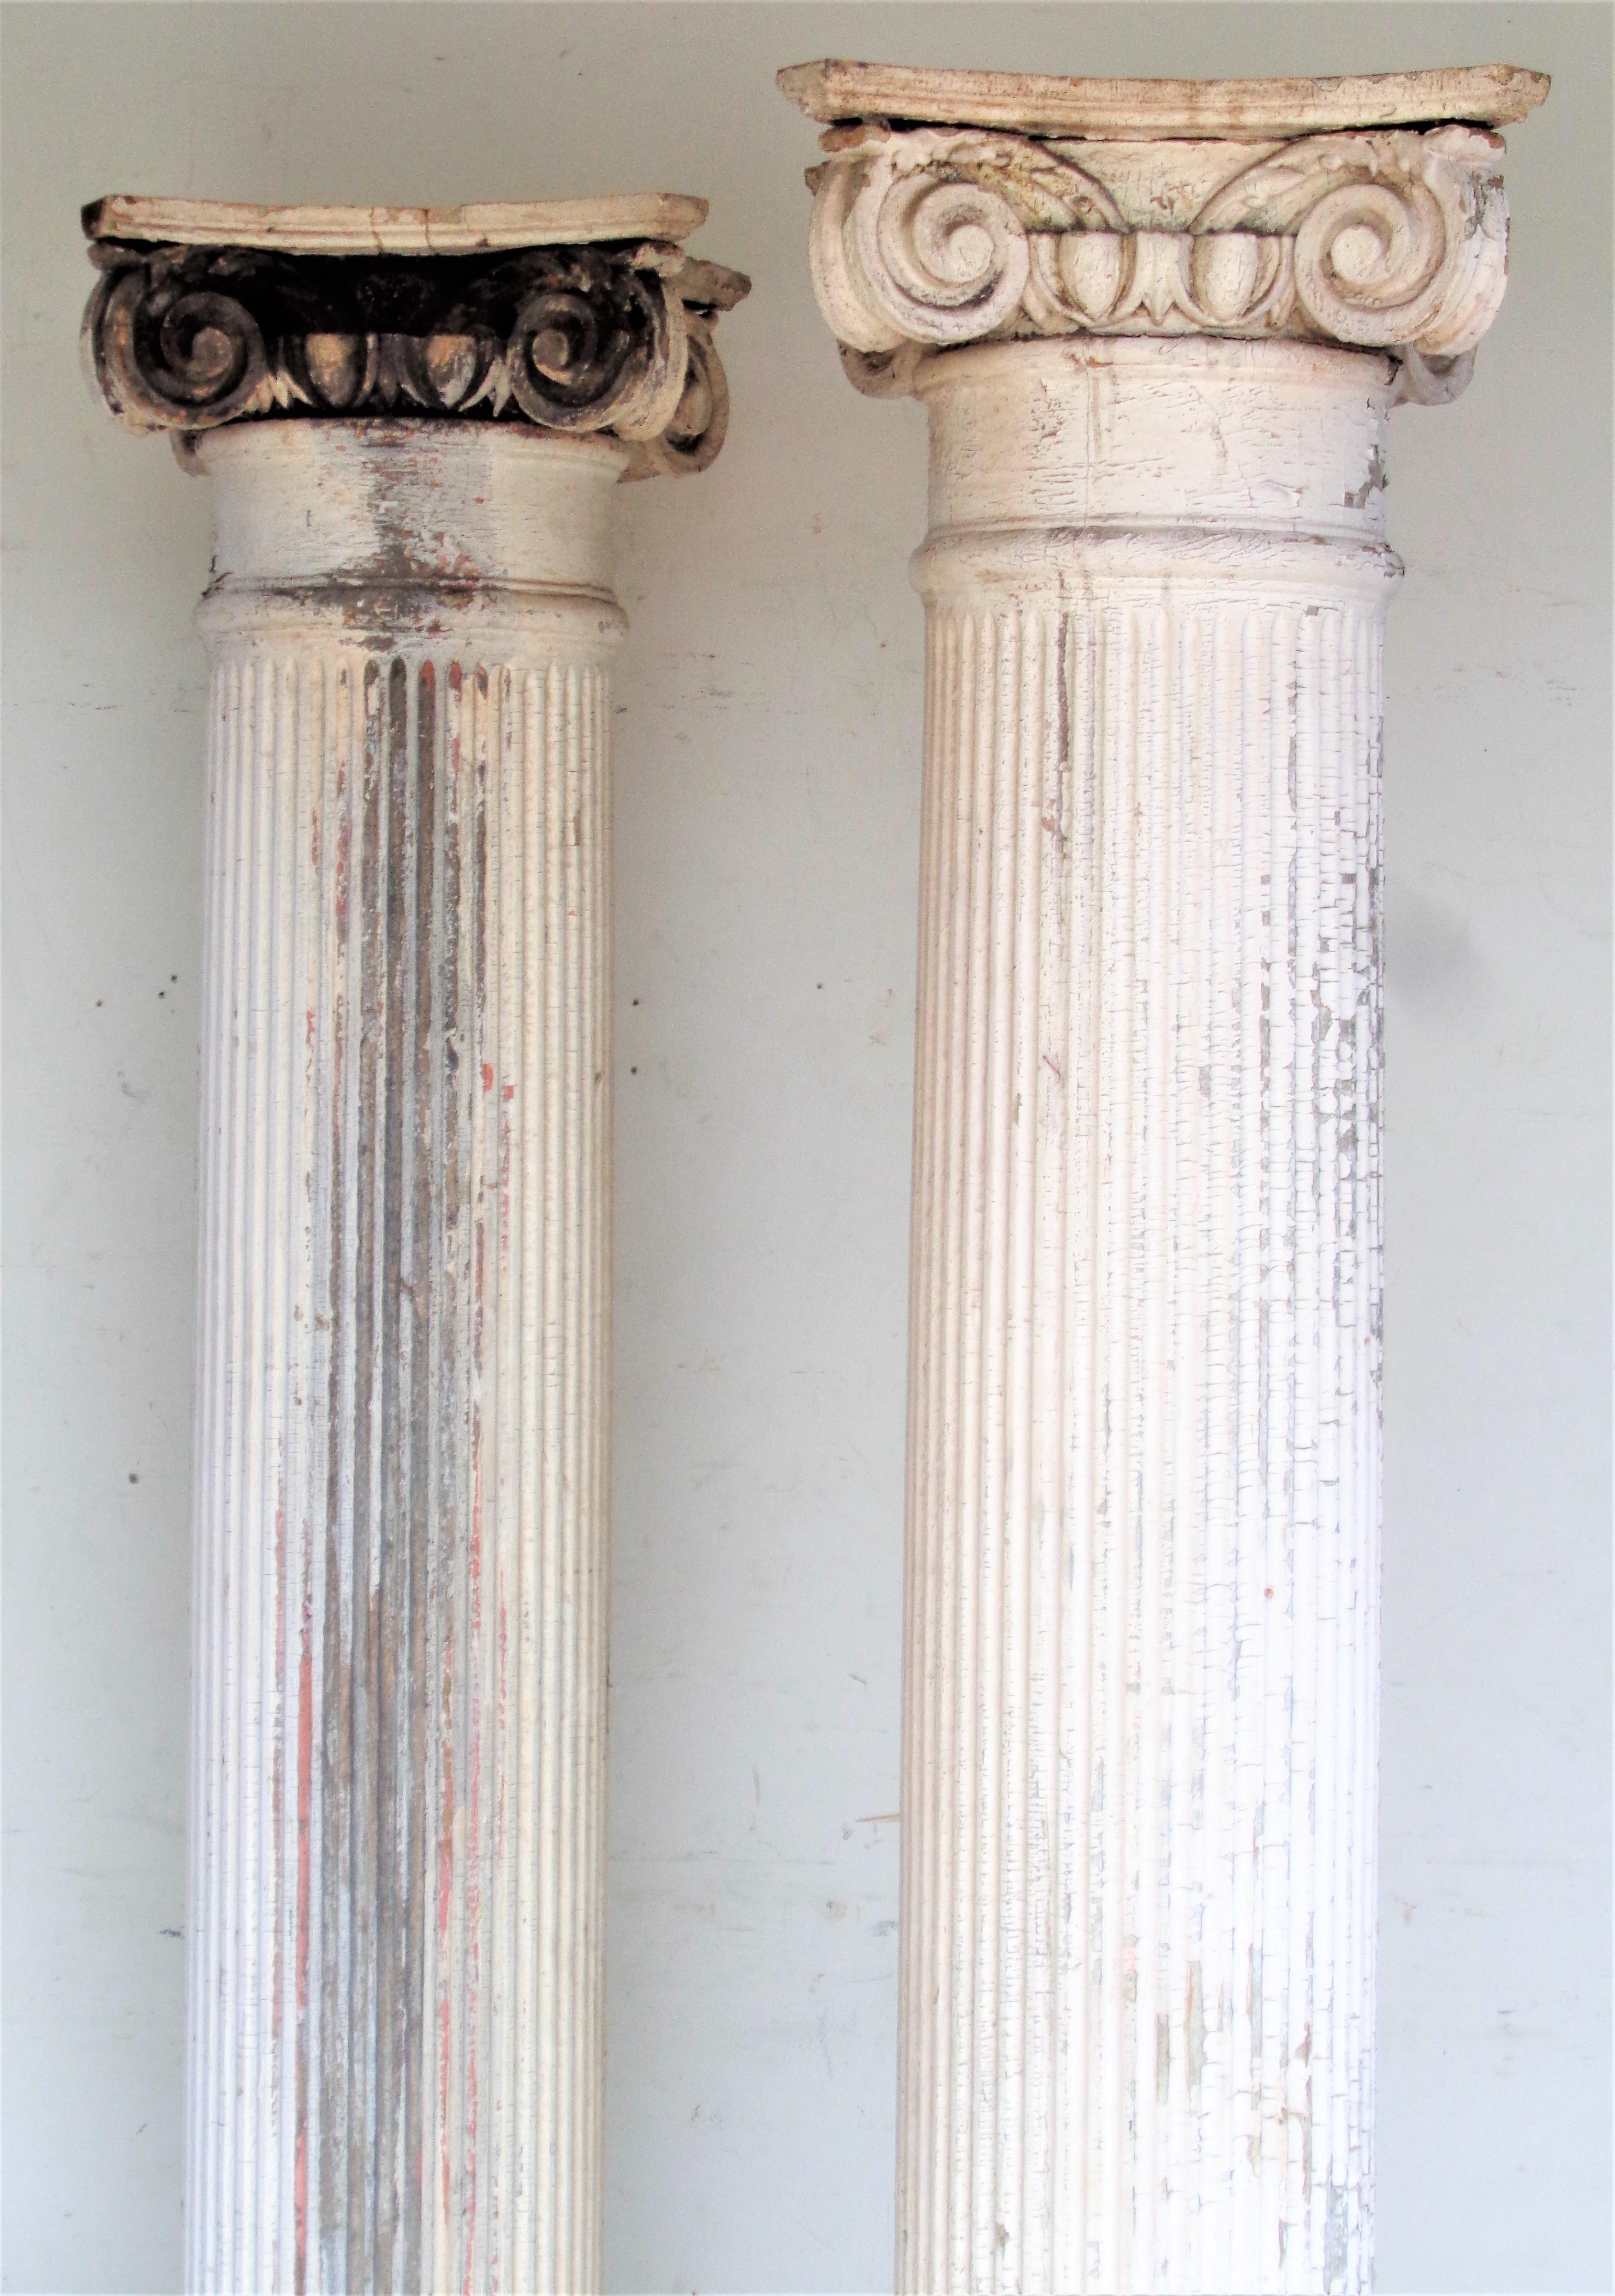 19th C. American Architectural Fluted Columns w/ Ionic Capitals 1